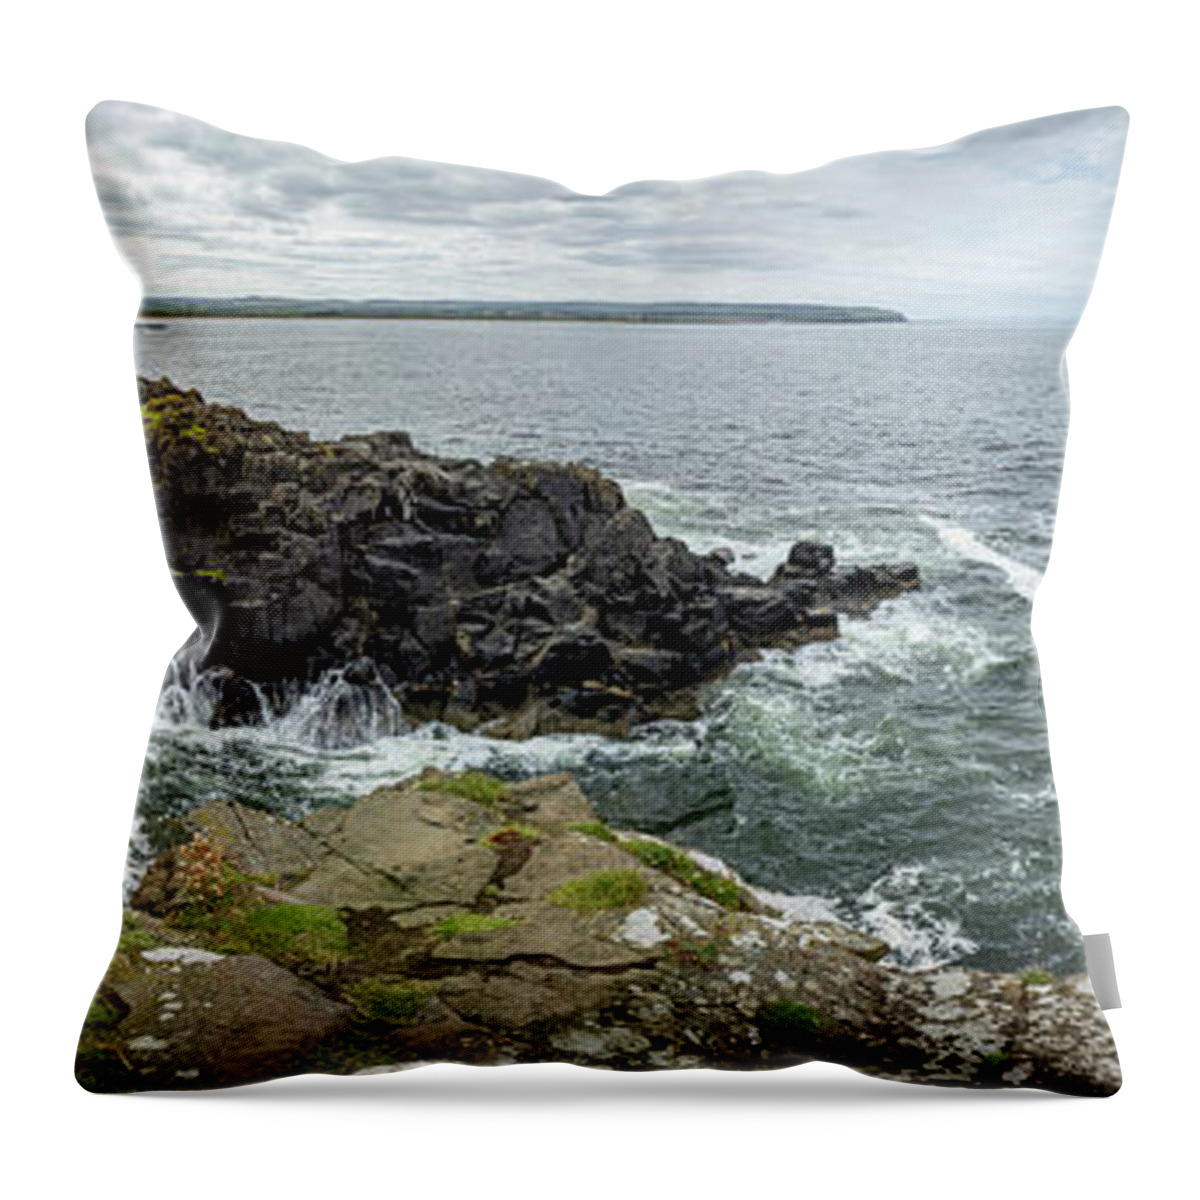 Portstewart Throw Pillow featuring the photograph Portstewart Harbour 1 by Nigel R Bell